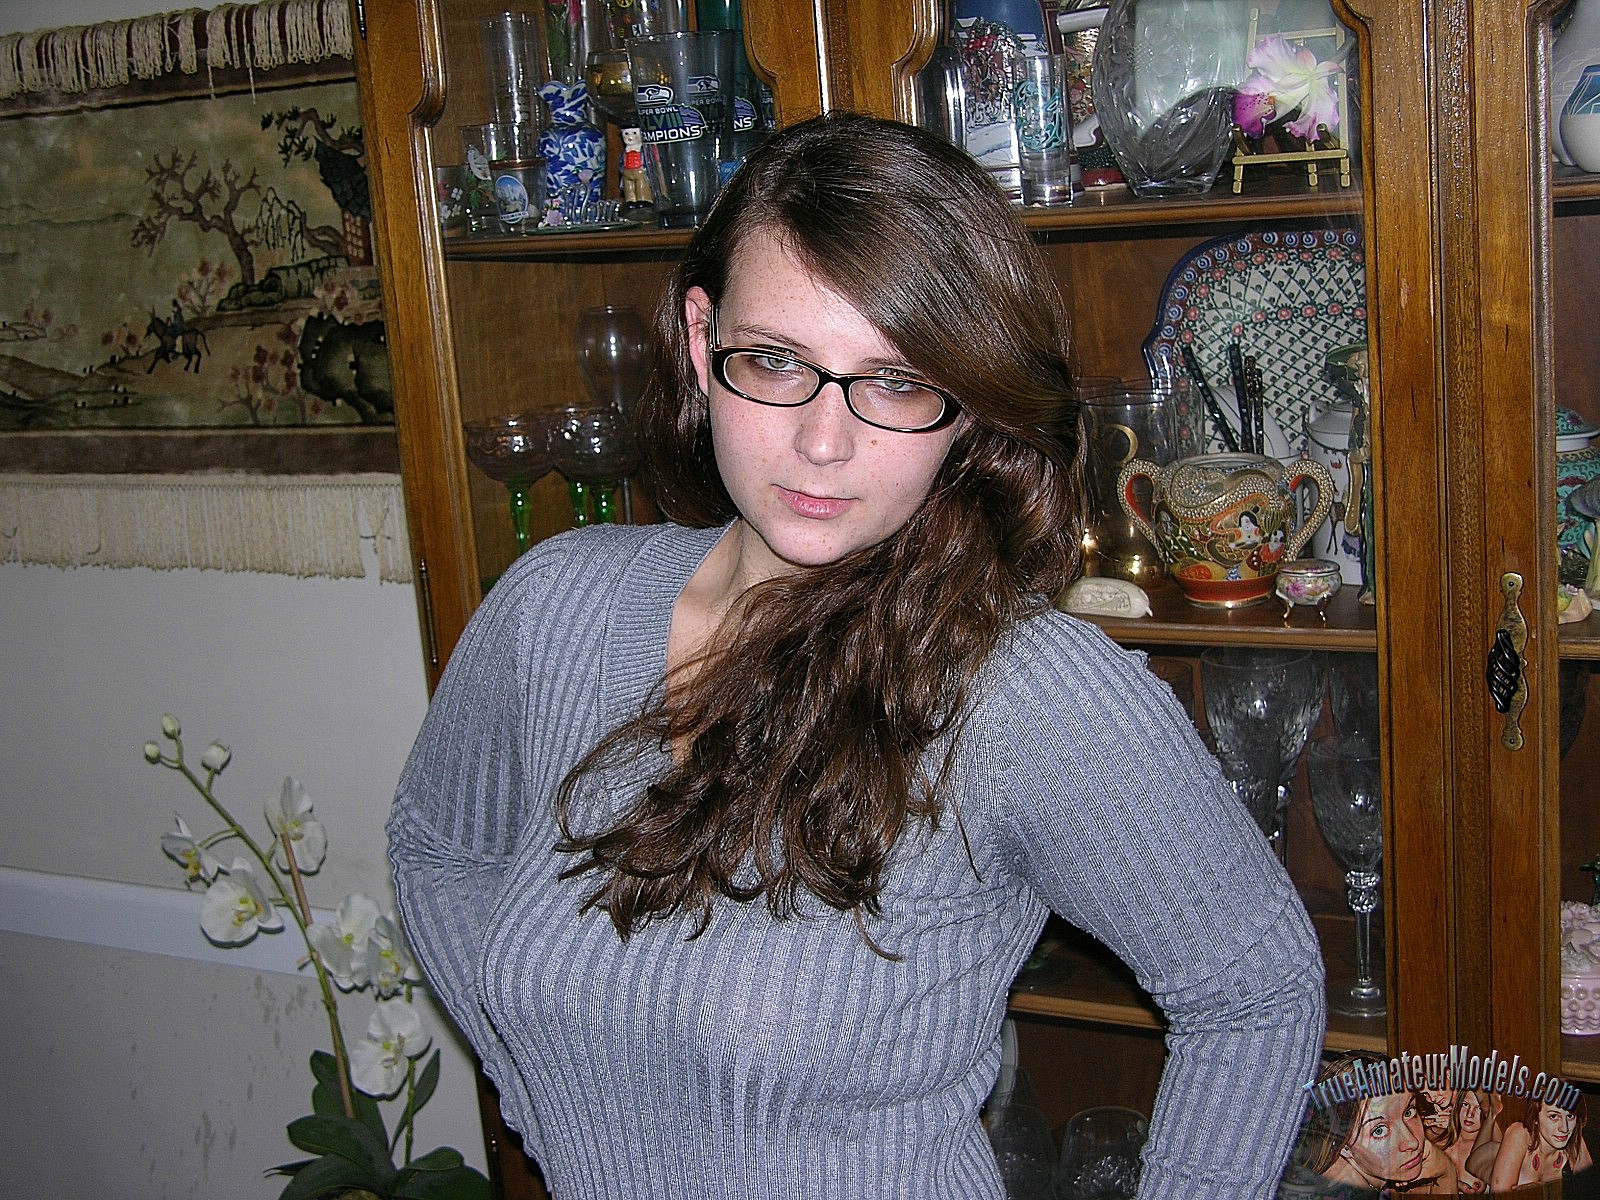 Nerdy amateur teen Skyye wearing glasses gets undressed and spreads her pussy image image